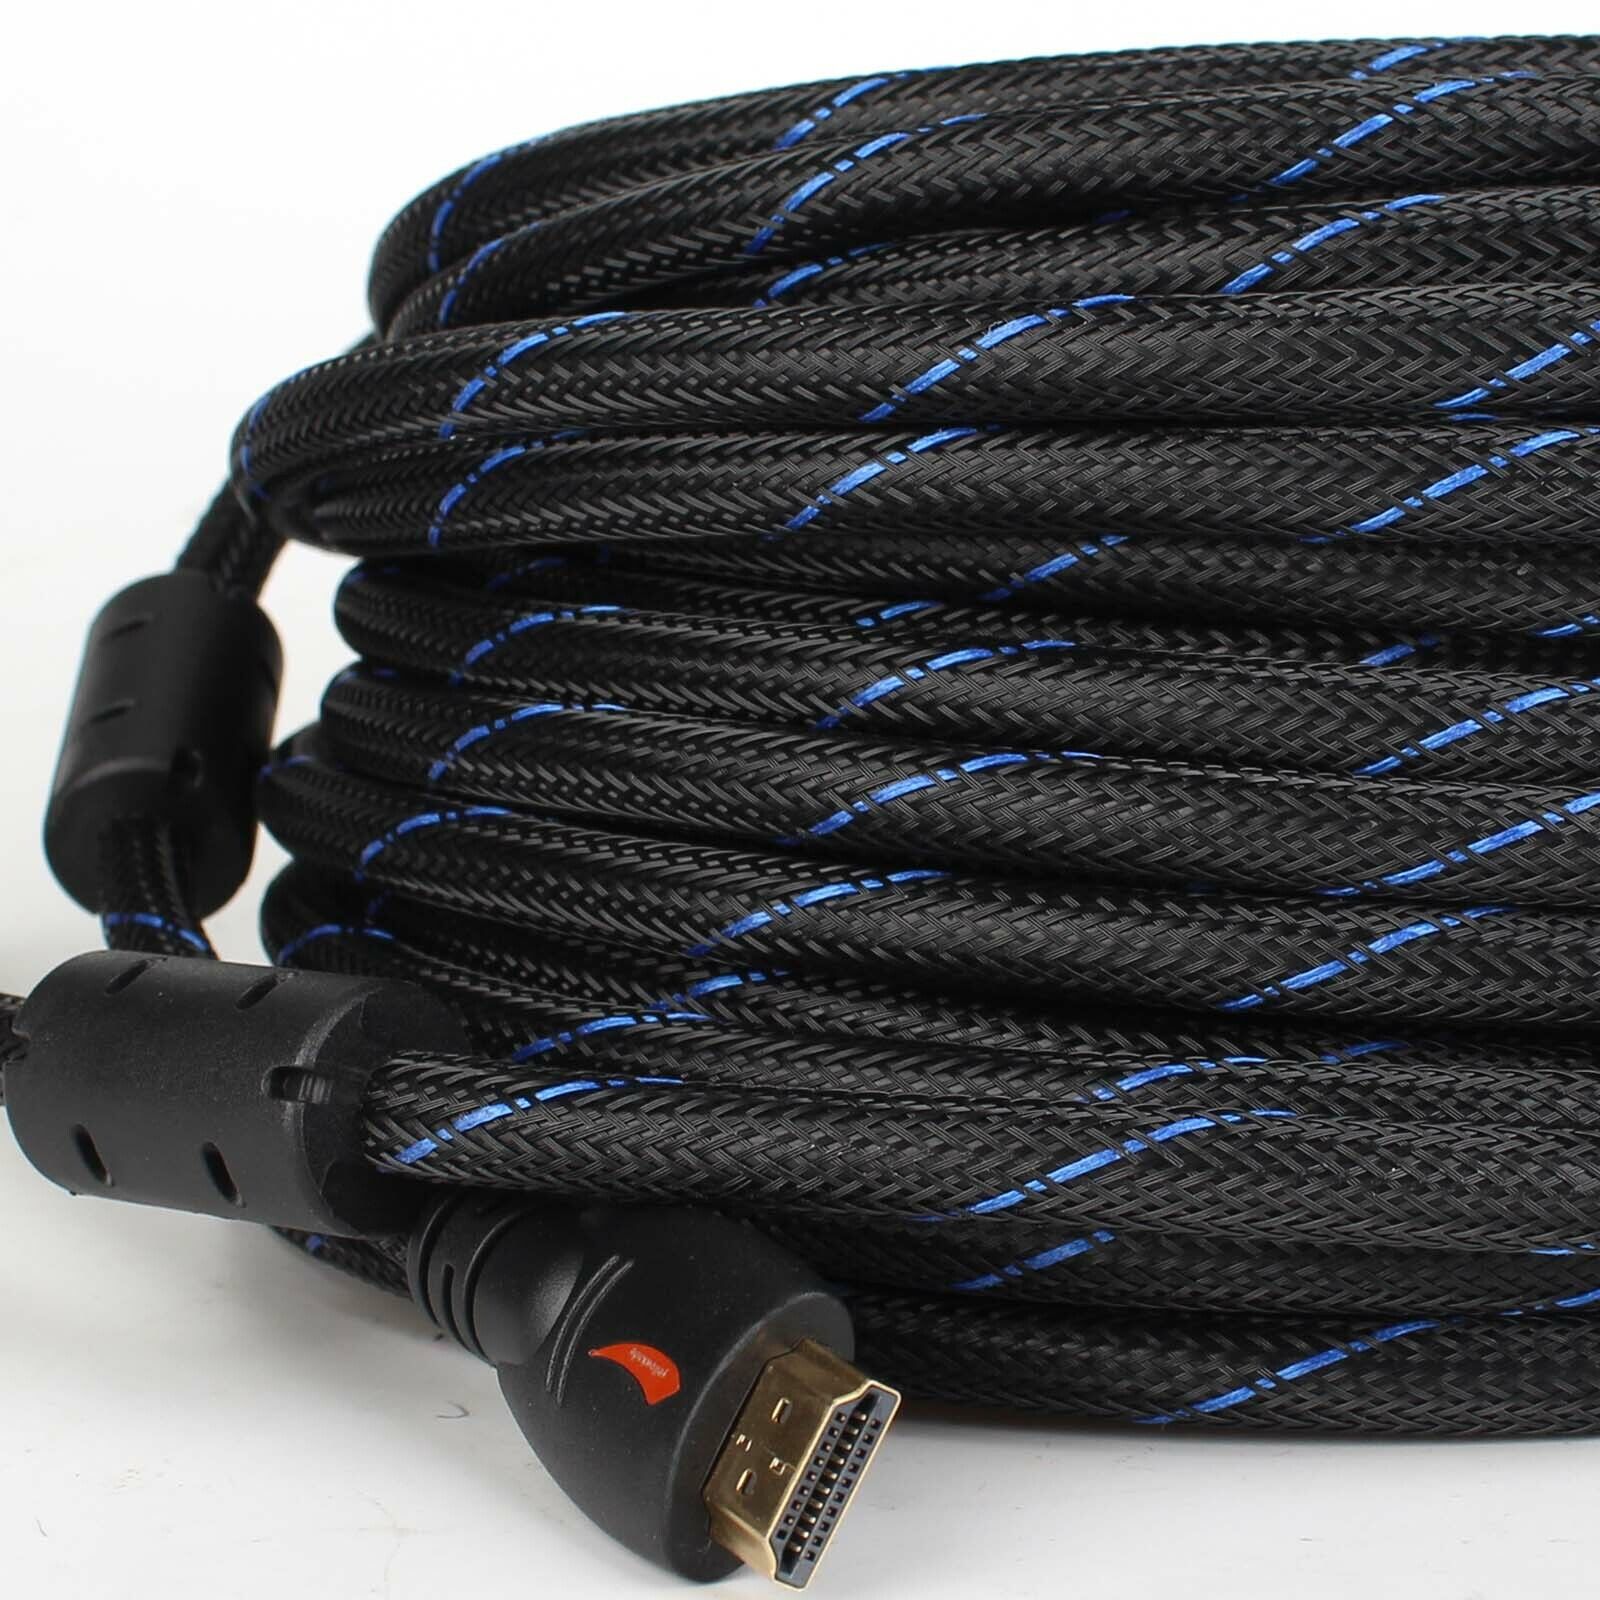 Premium 50FT HDMI to HDMI Cable Lead with Etherent FULL 3D HD, PS3 XBOX 360, PS4